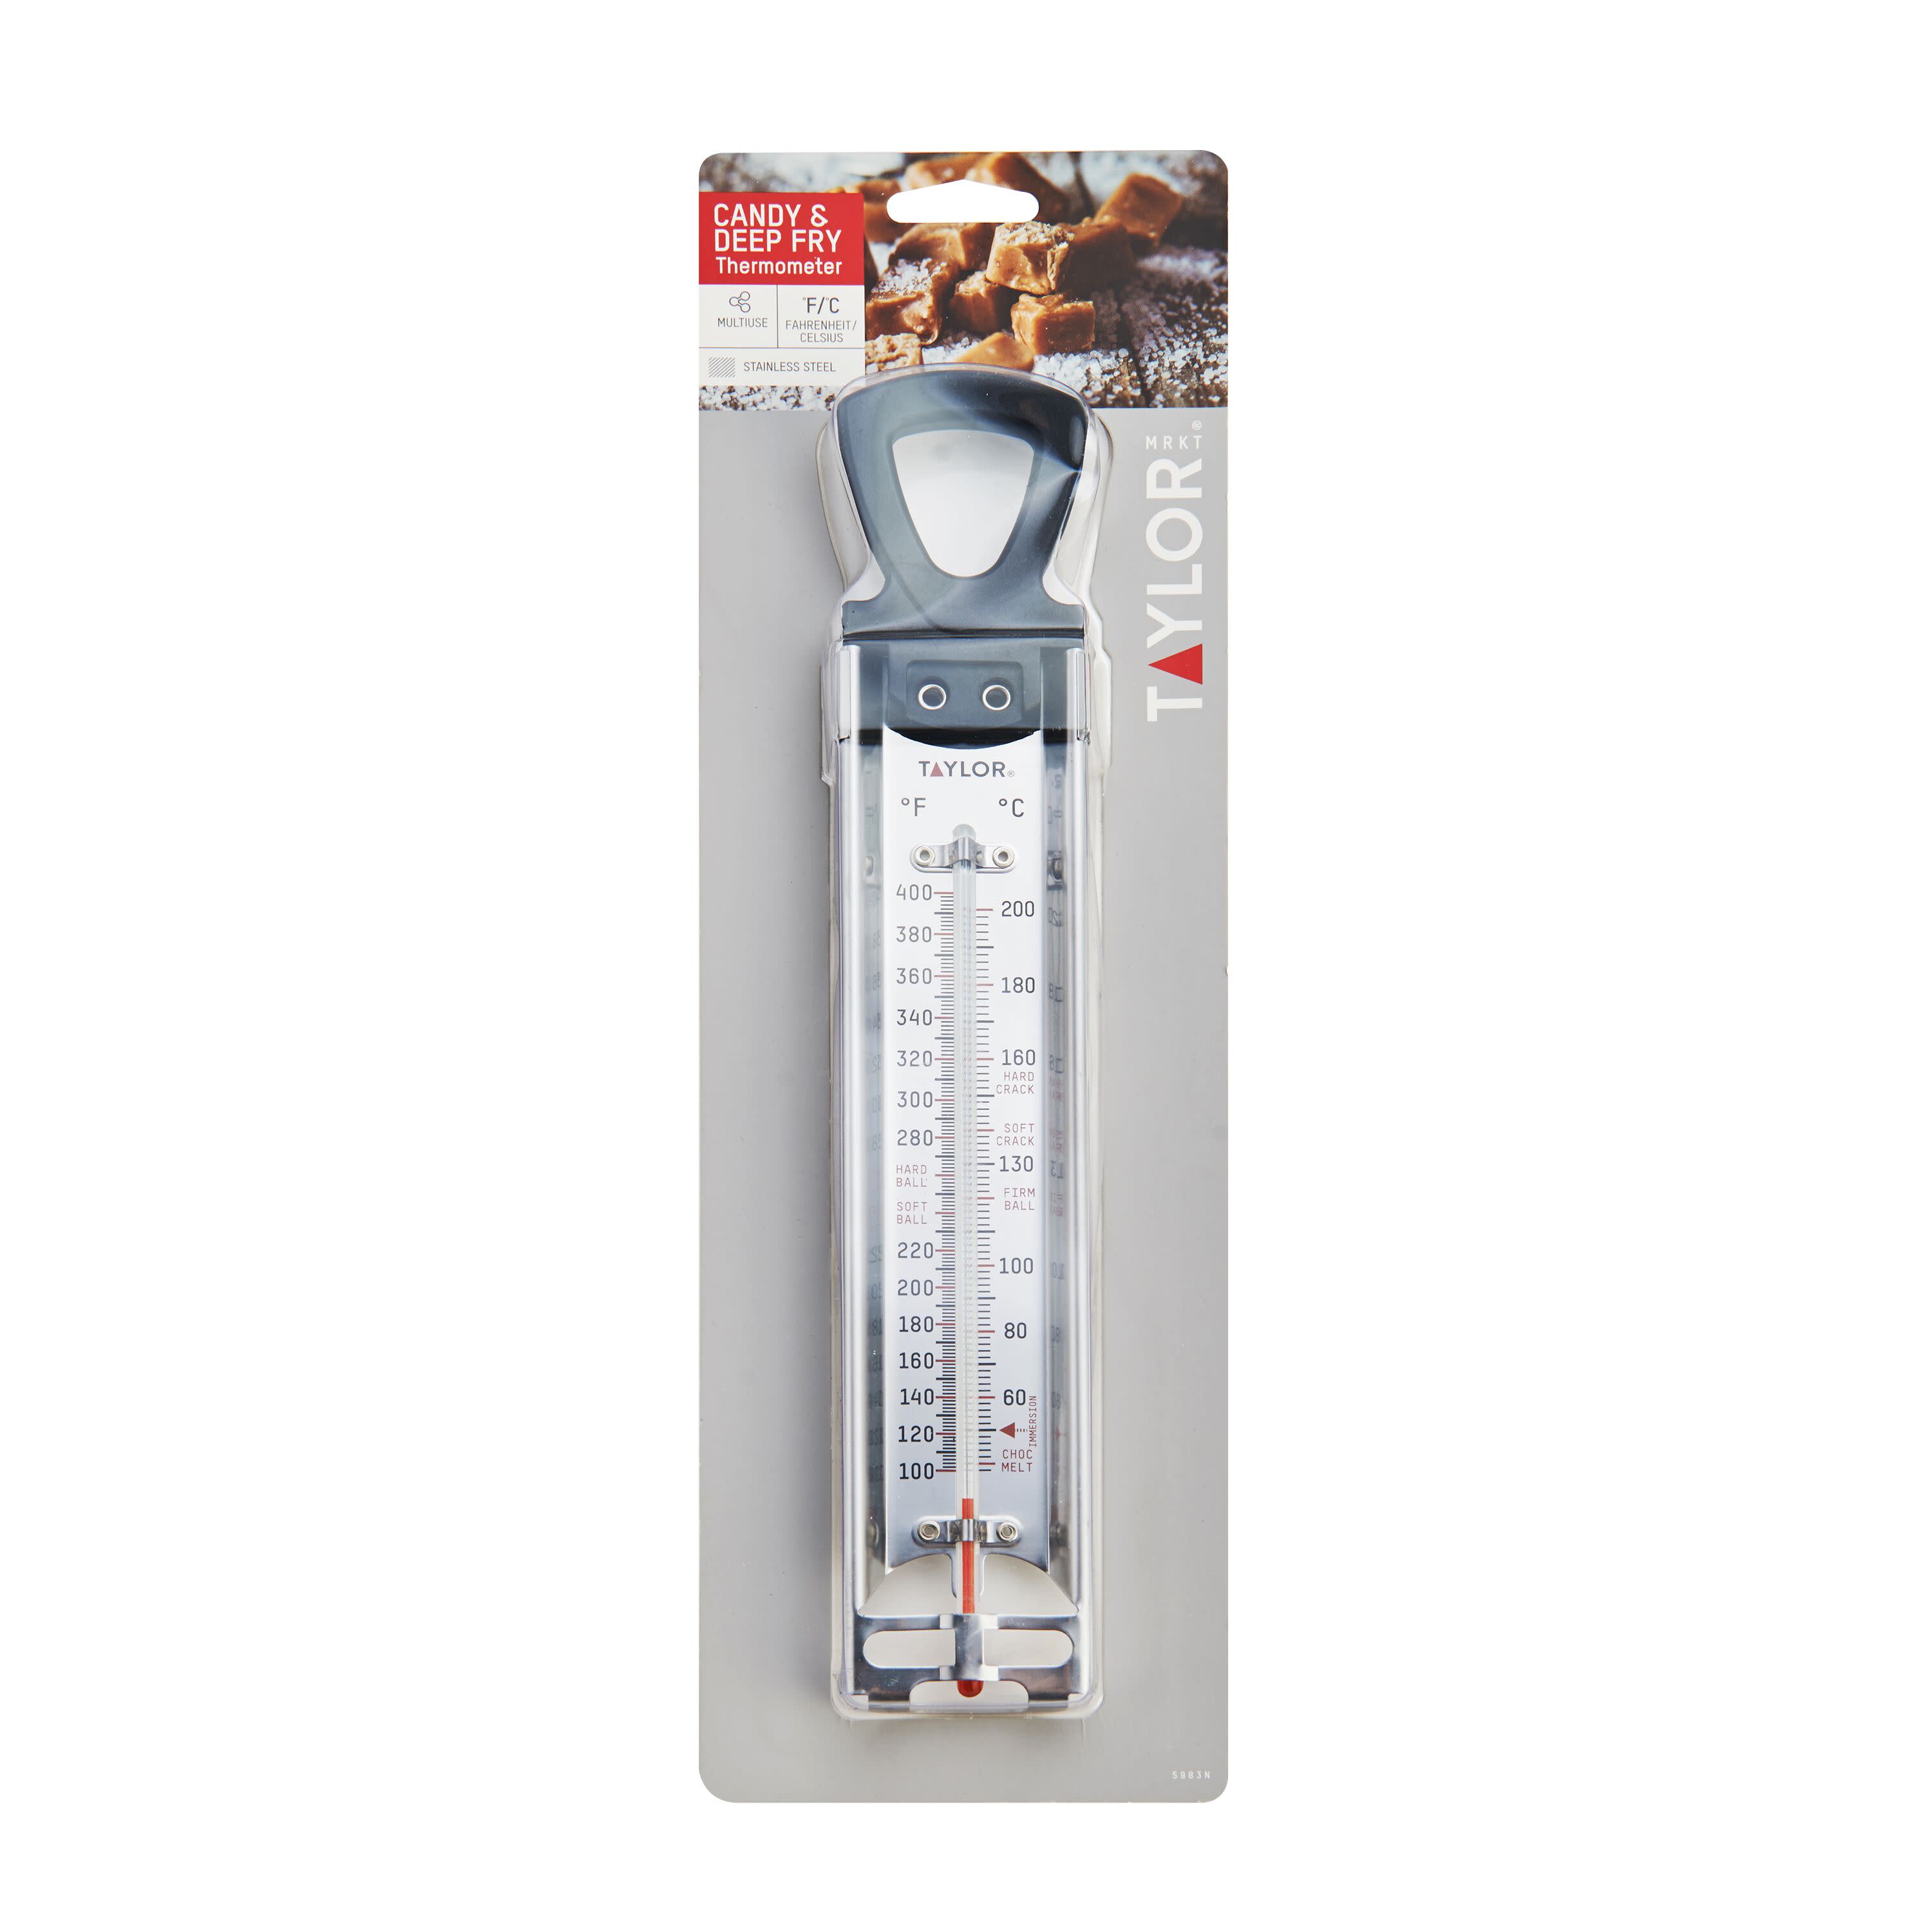 Taylor Candy and Deep Fry Thermometer with Adjustable Pan Clip - image 5 of 6